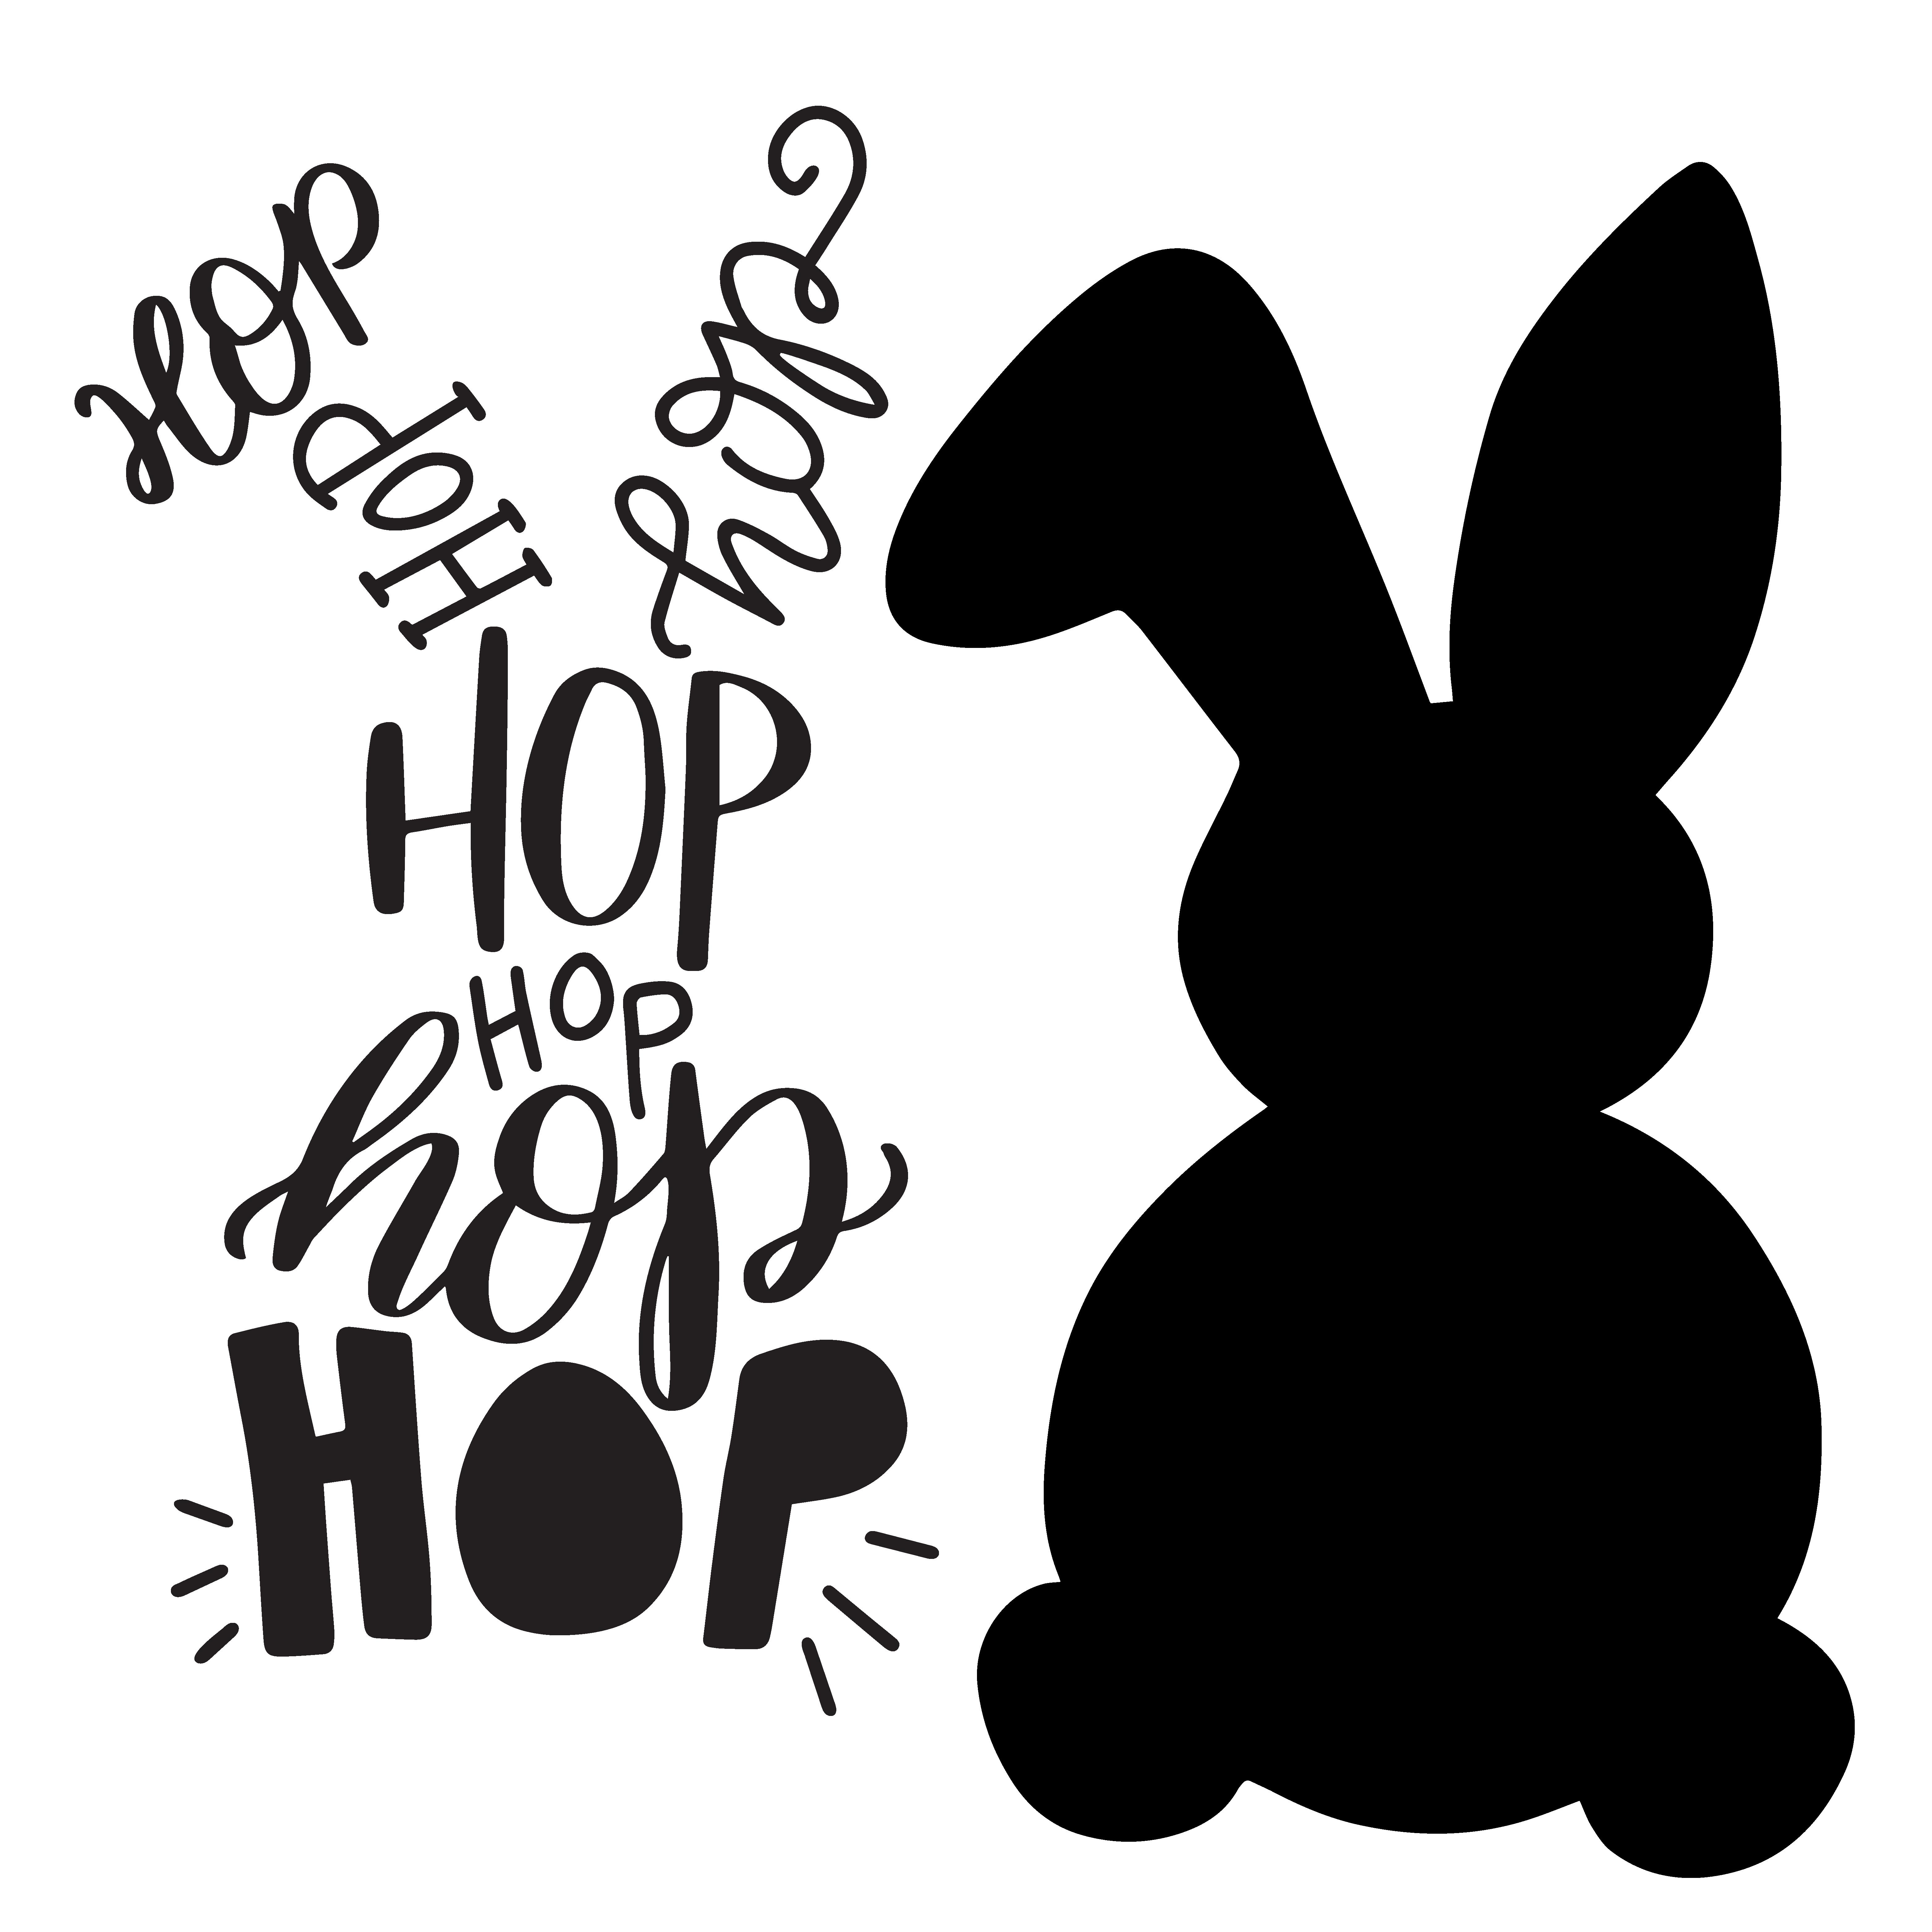 Easter Bunny Silhouette Clip Art.